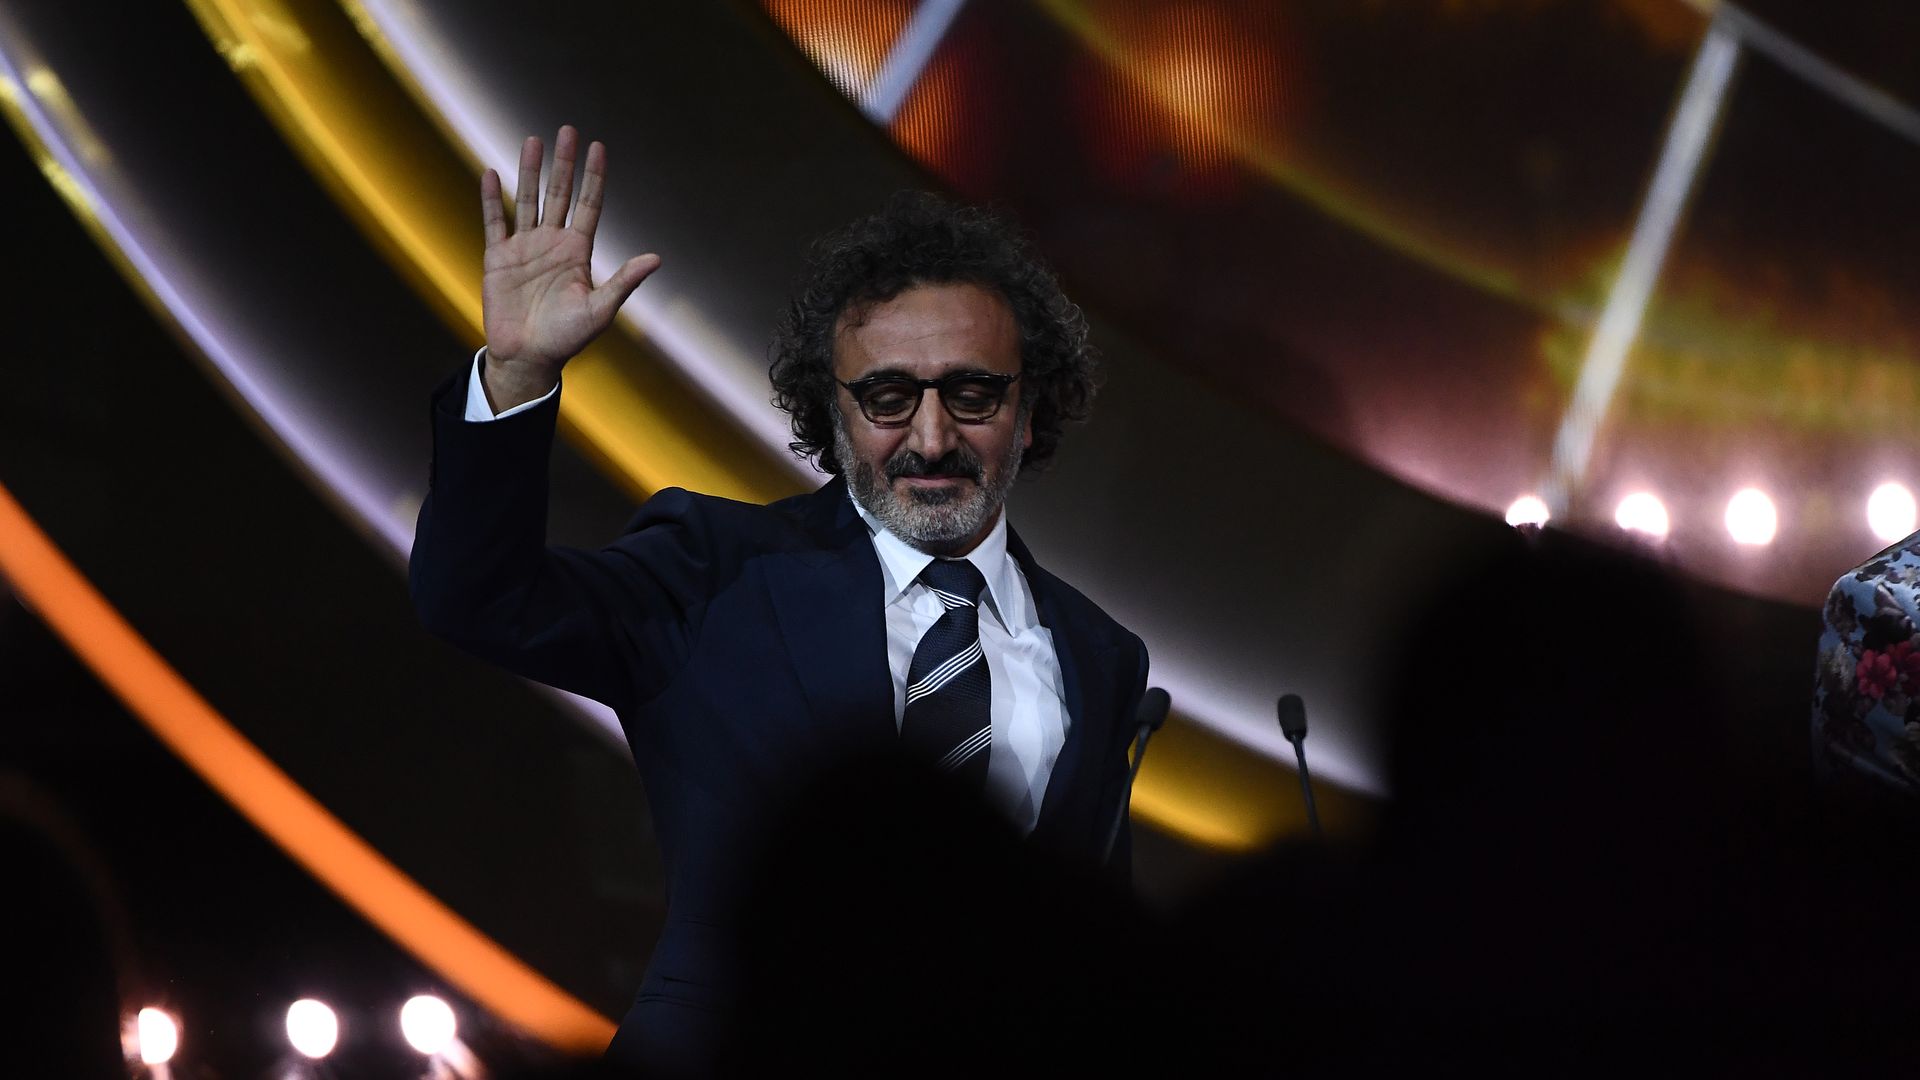  Hamdi Ulukaya is seen on stage at the 2019 Global Citizen Prize at the Royal Albert Hall on December 13, 2019 in London, England.